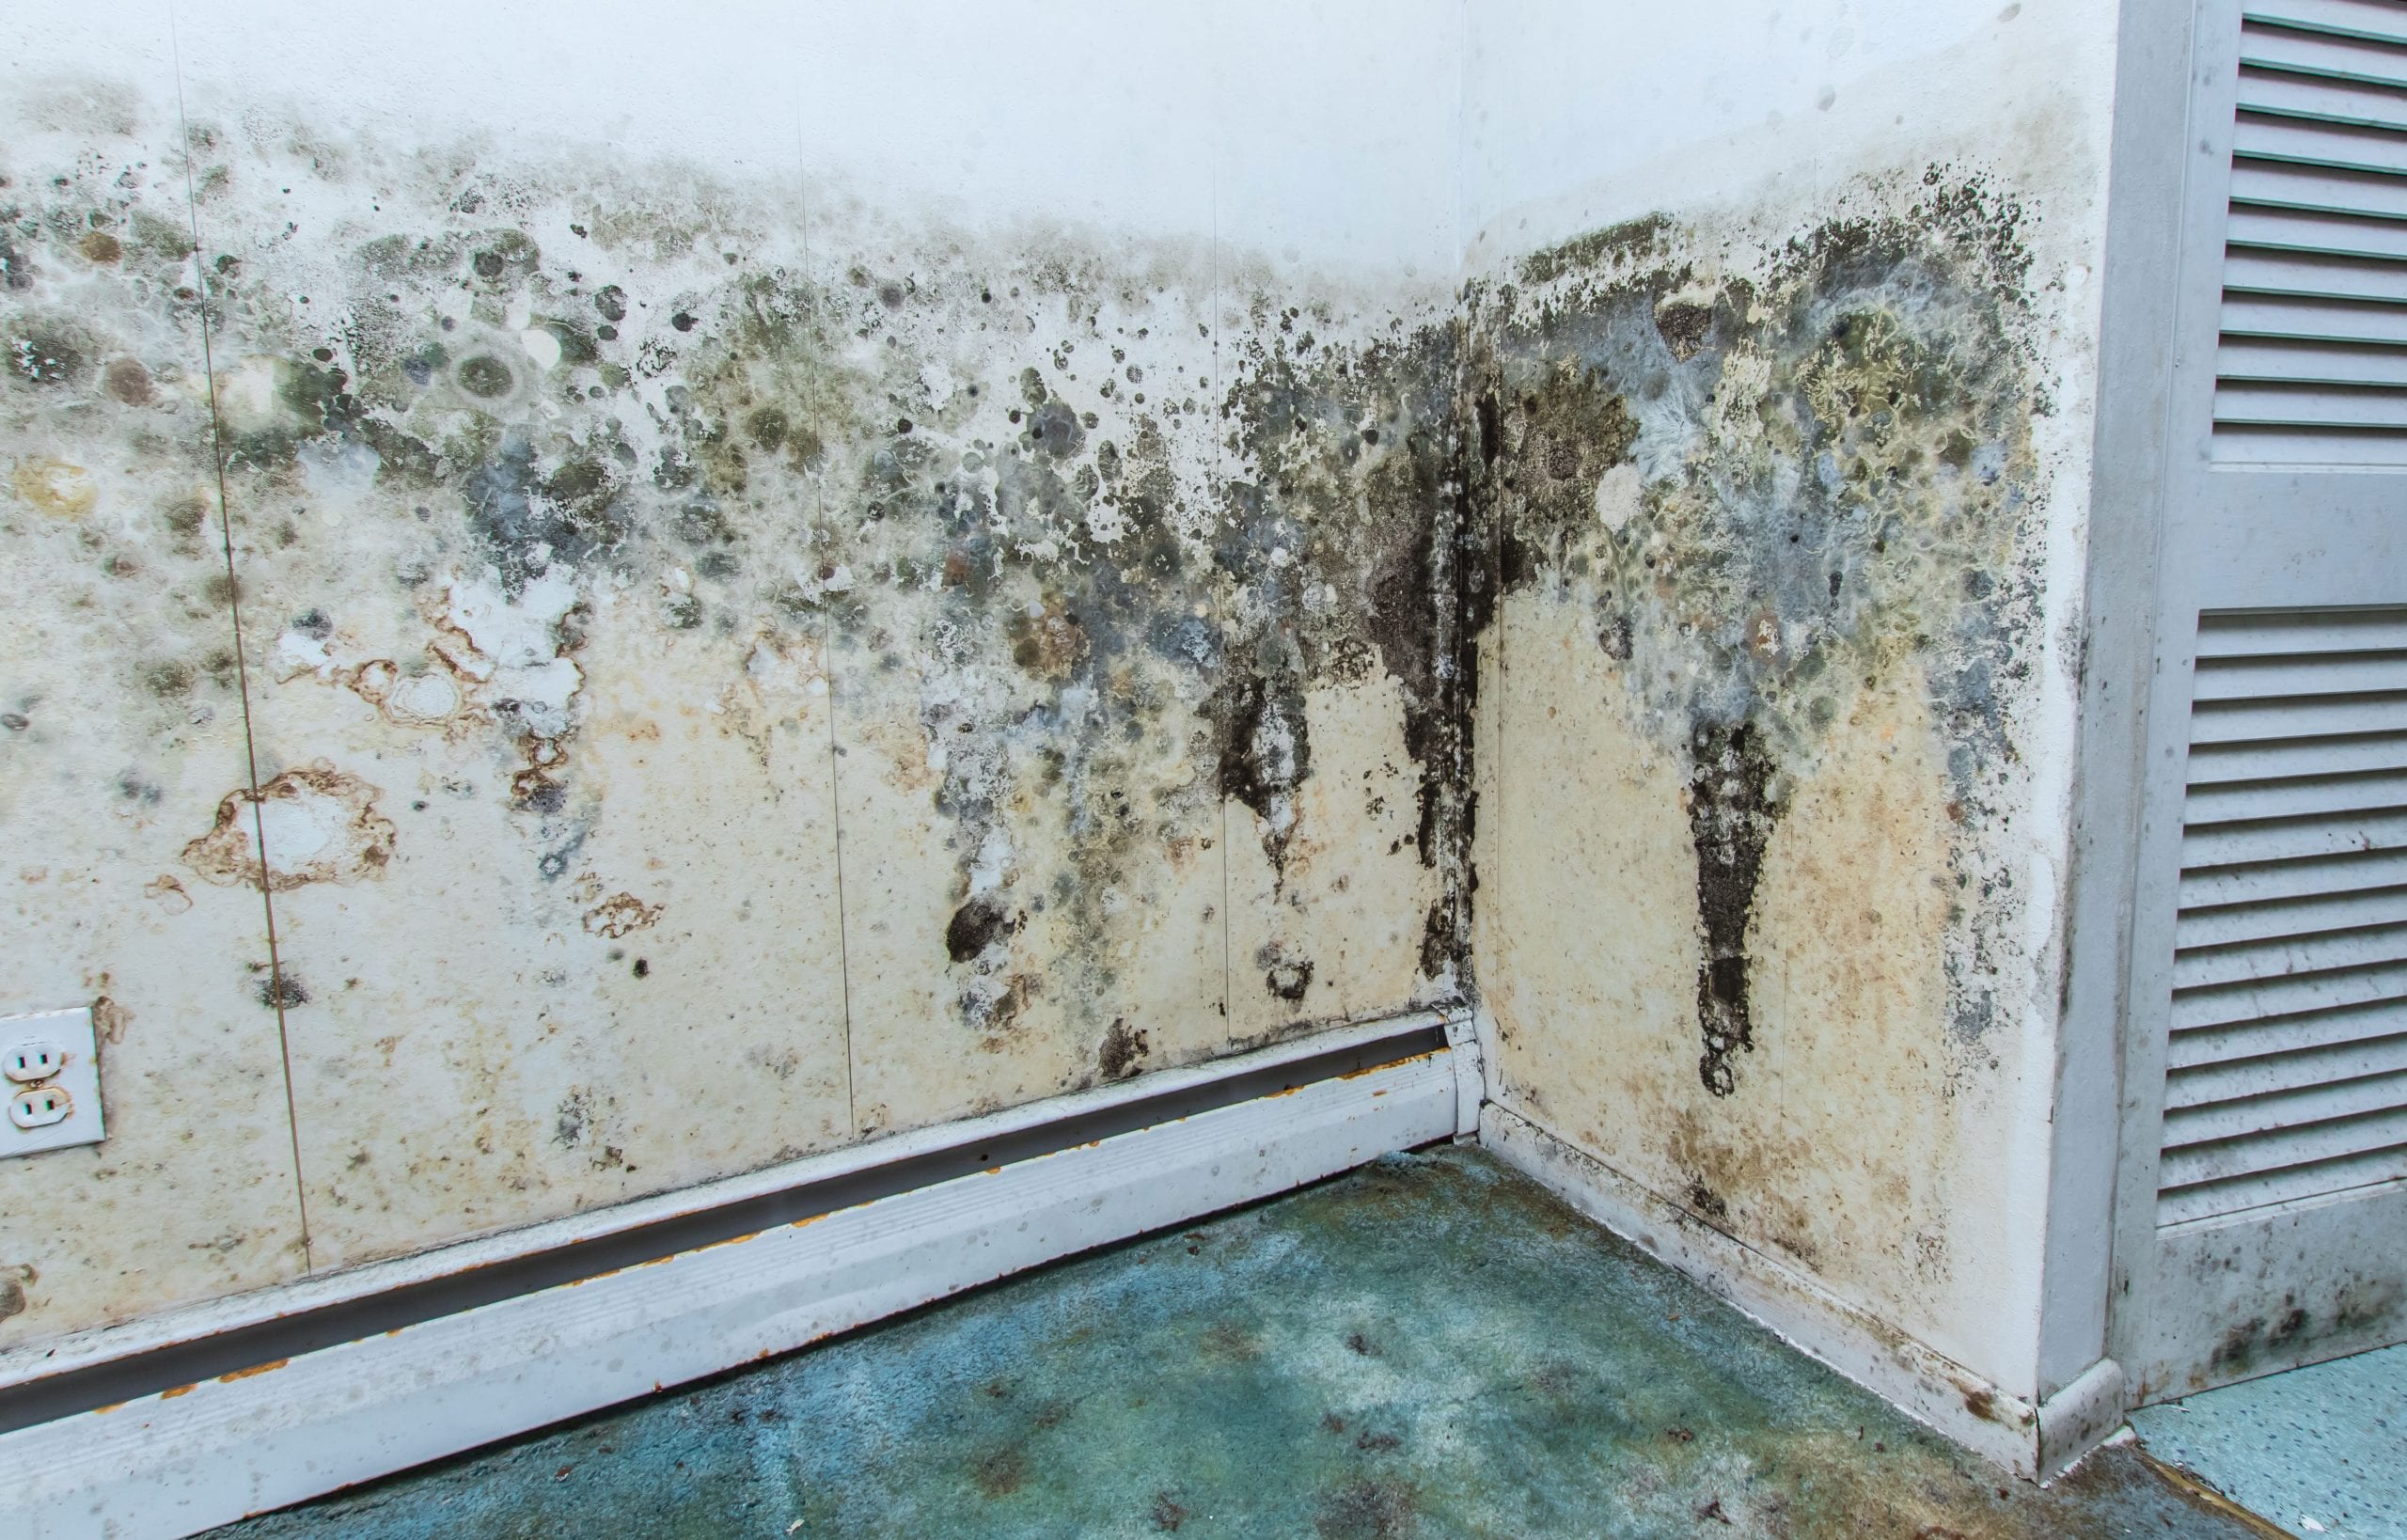 Professional service for mold removal and mold prevention in Broken Arrow, Oklahoma and surrounding areas.